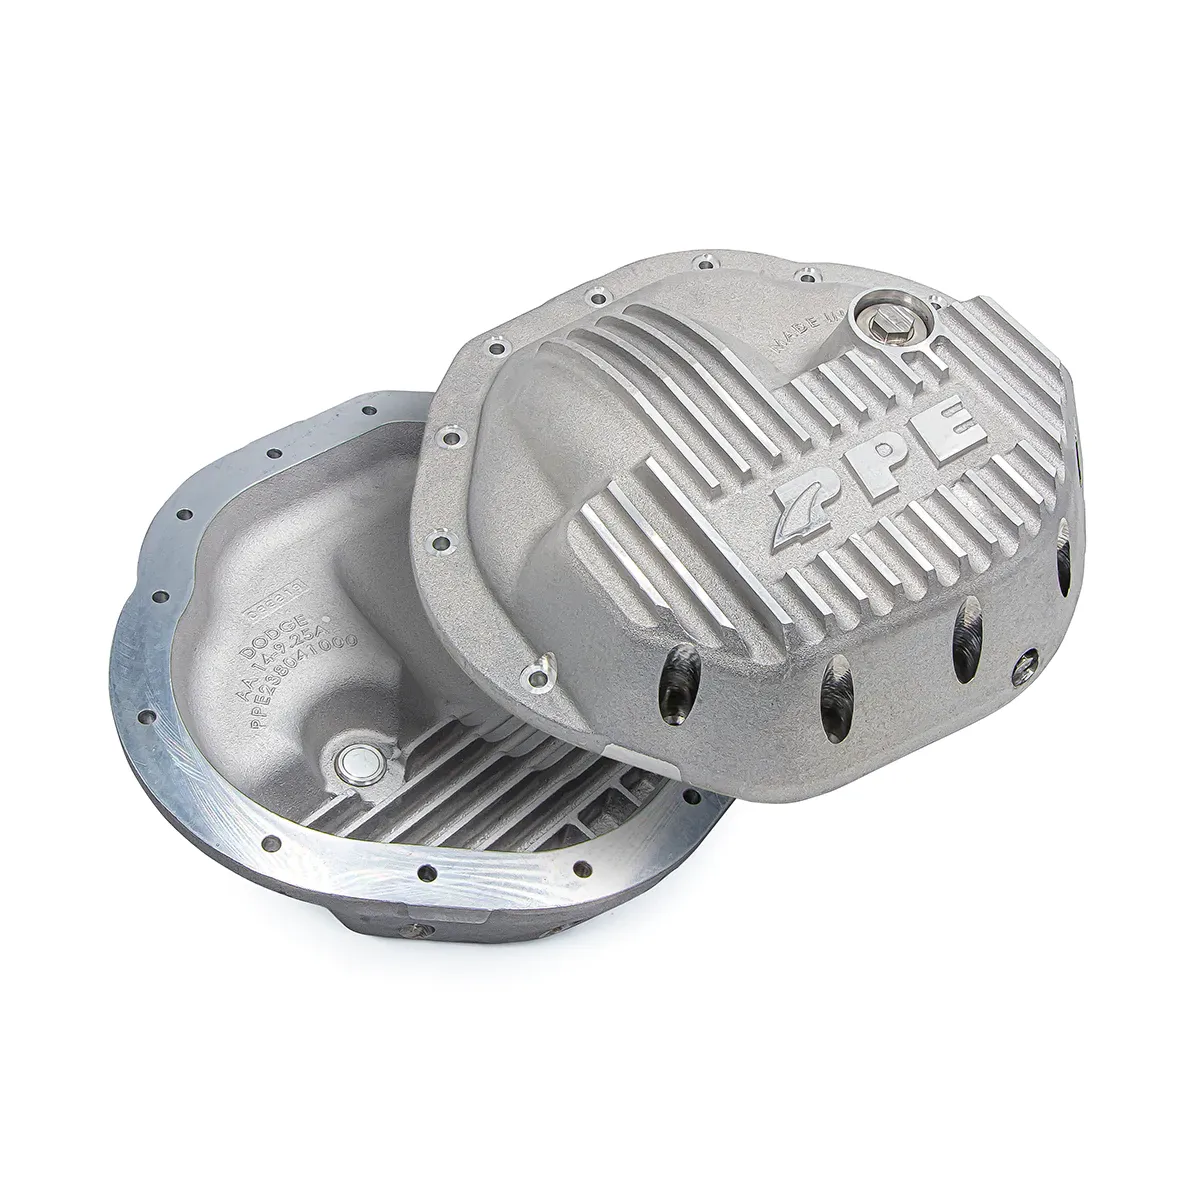 PPE - PPE Raw HD Front Differential Cover For 2002-2014 Dodge Ram 2500/3500